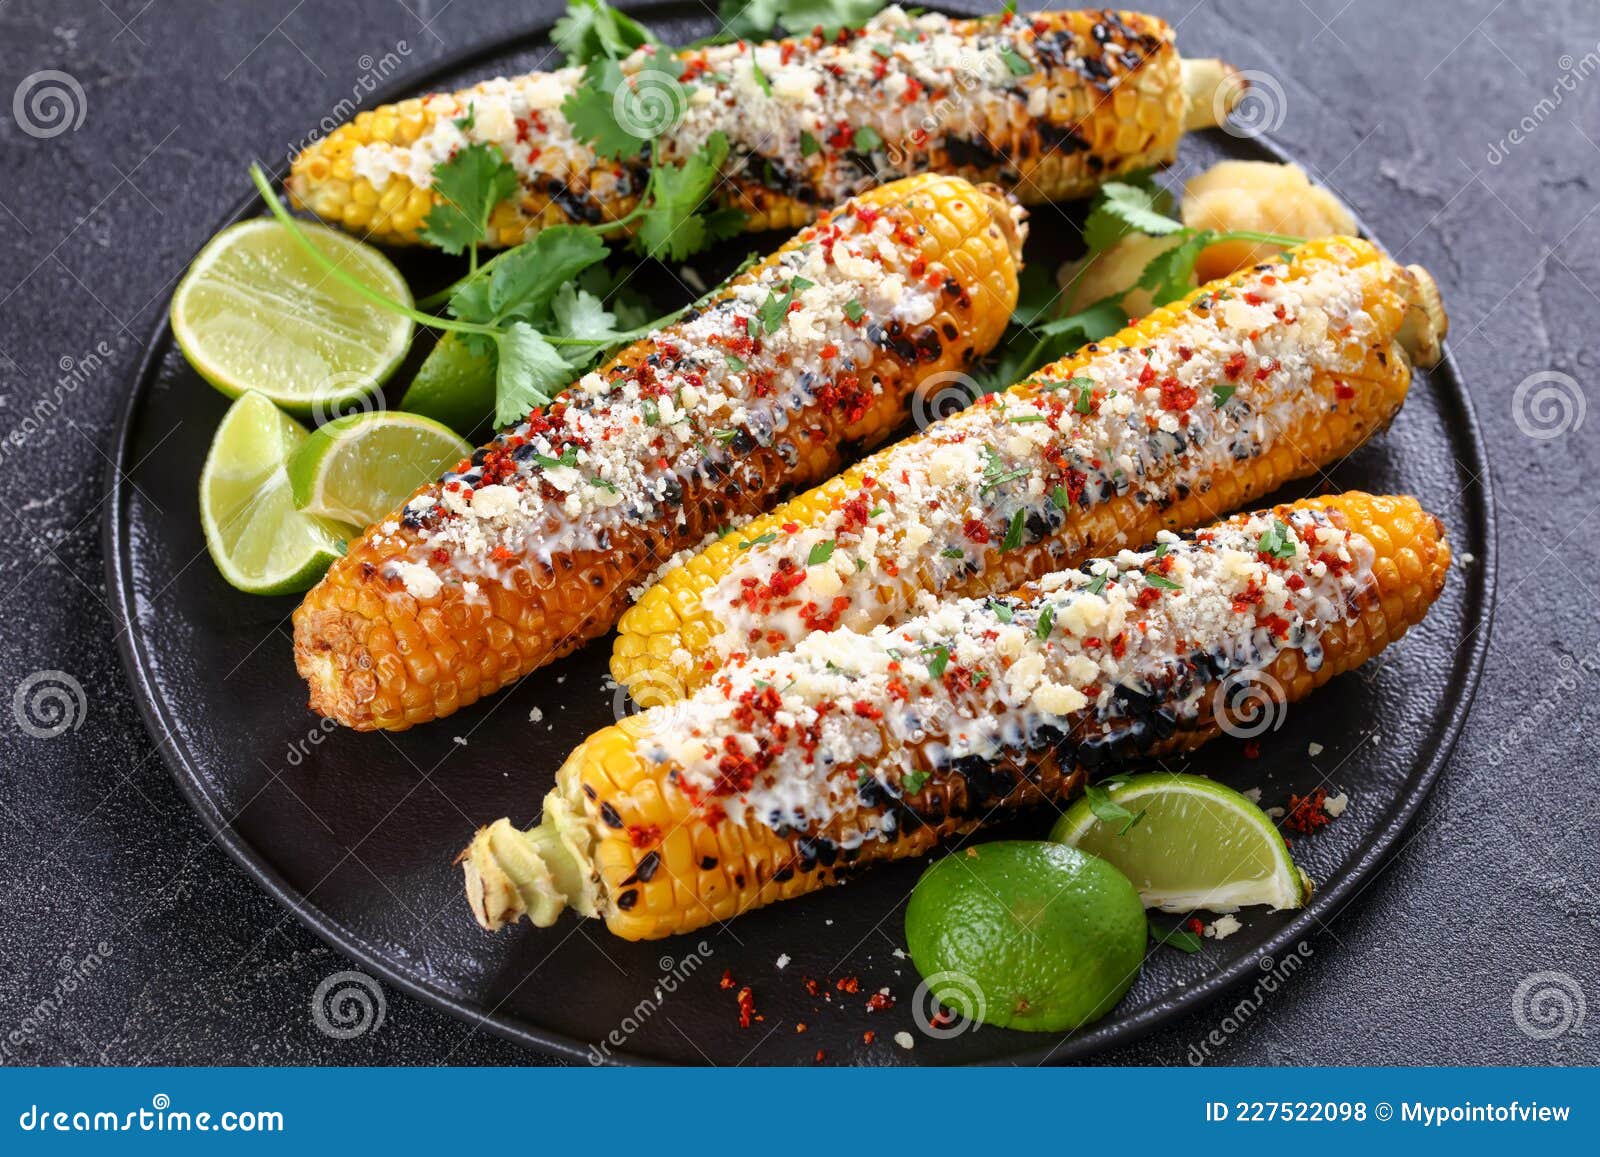 Elotes, Grilled Mexican Street Corn on a Plate Stock Photo - Image of  rustic, chili: 227522098